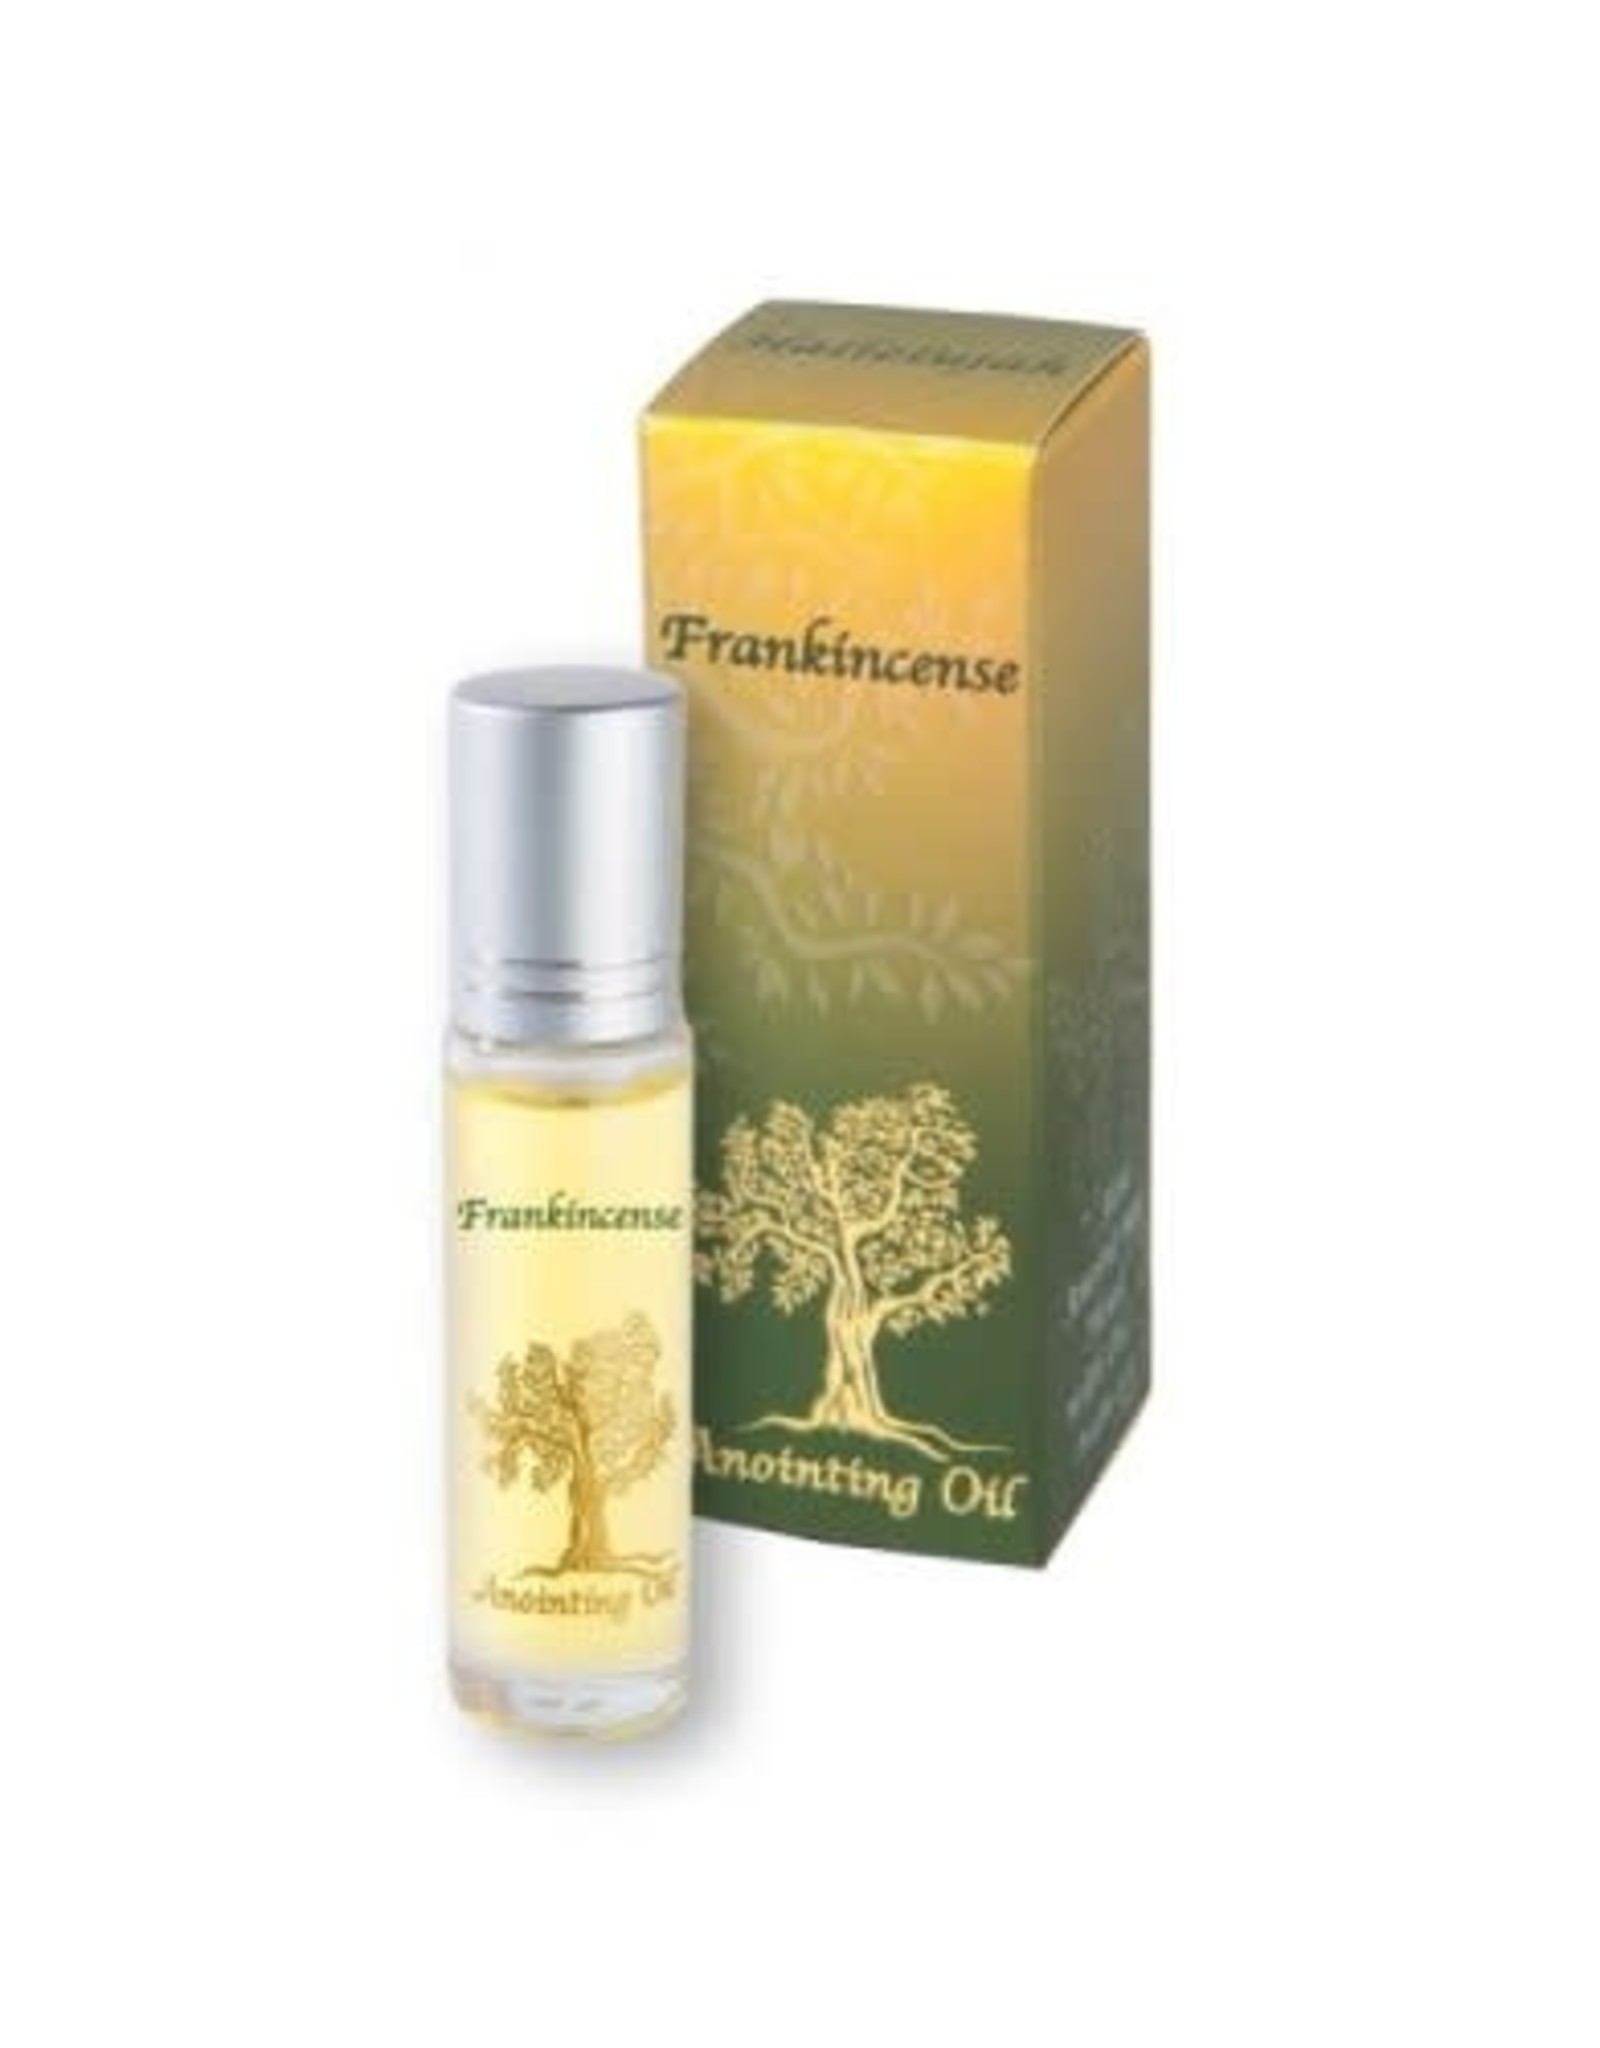 Holy Land Gifts Anointing Oil: Frankincense Holy Land